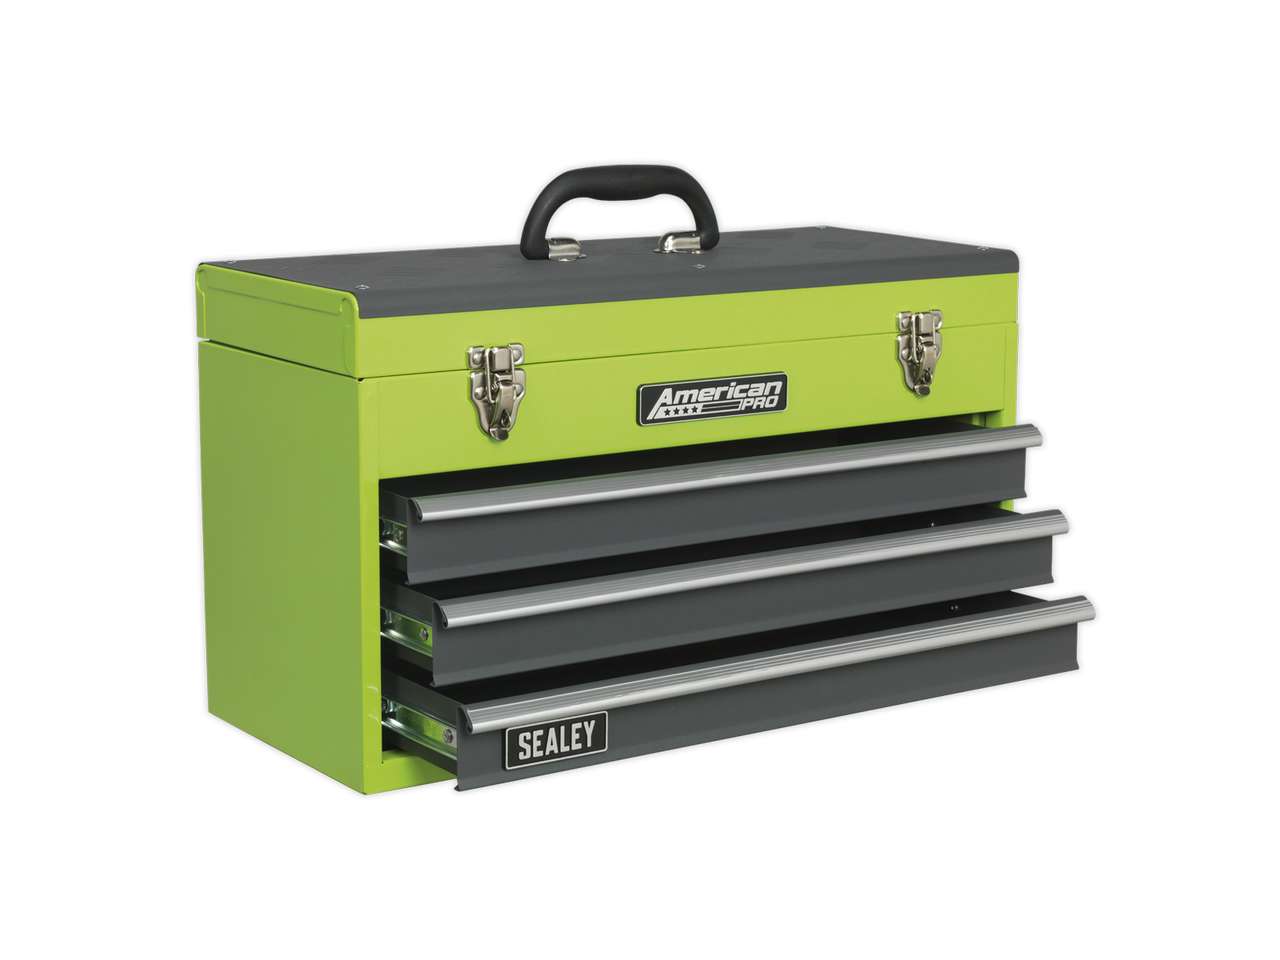 Sealey AP9243BBHV Tool Chest 3 Drawer Portable with Ball Bearing 